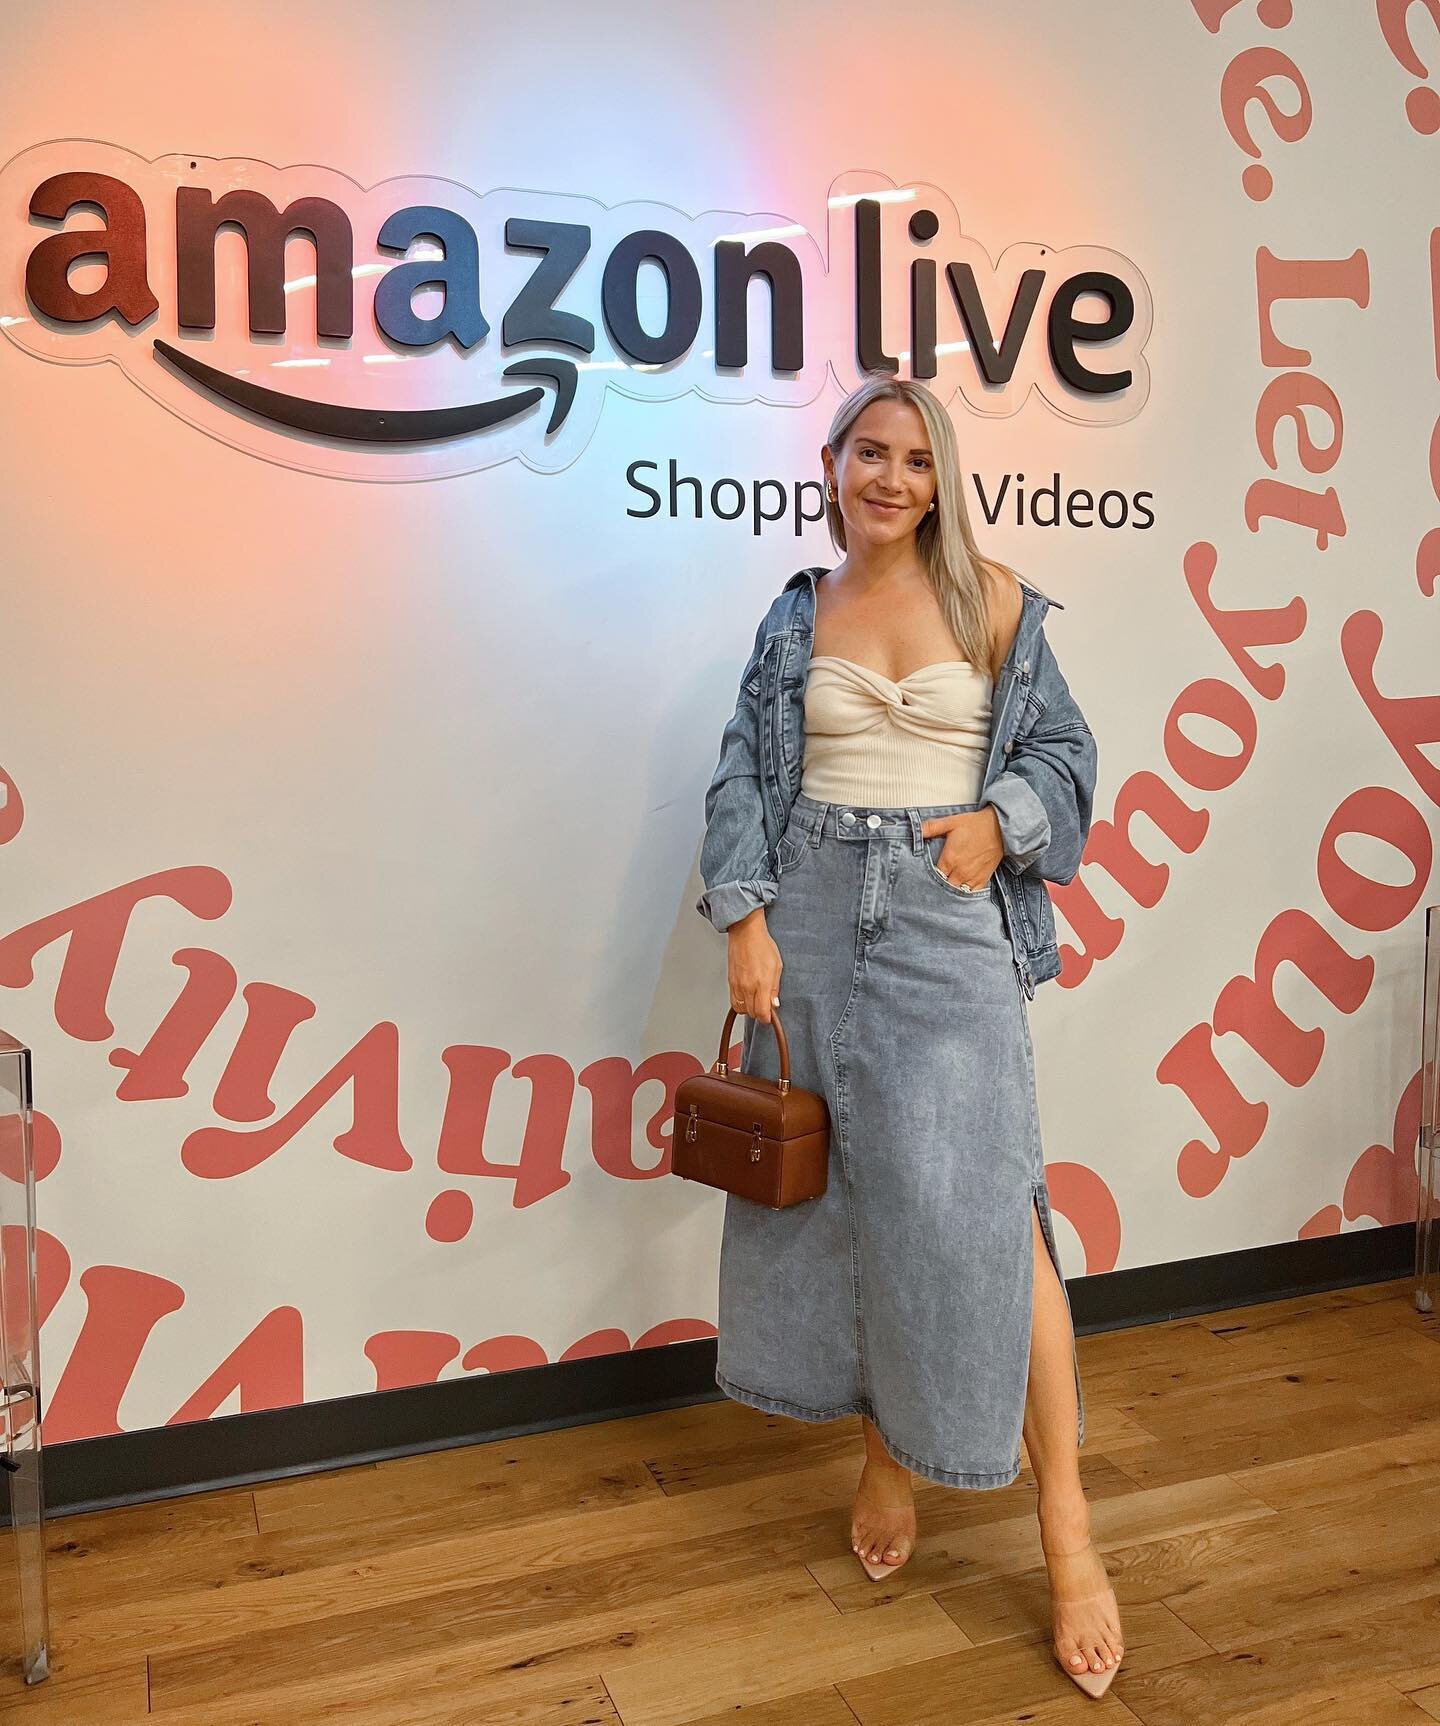 Live from NY! Excited to be back in the city with @amazonlive 🏙🍎 Links to this Amazon outfit on stories along with the fun. If you&rsquo;d like me to send you a DM with links then comment below! Xo #amazonlive